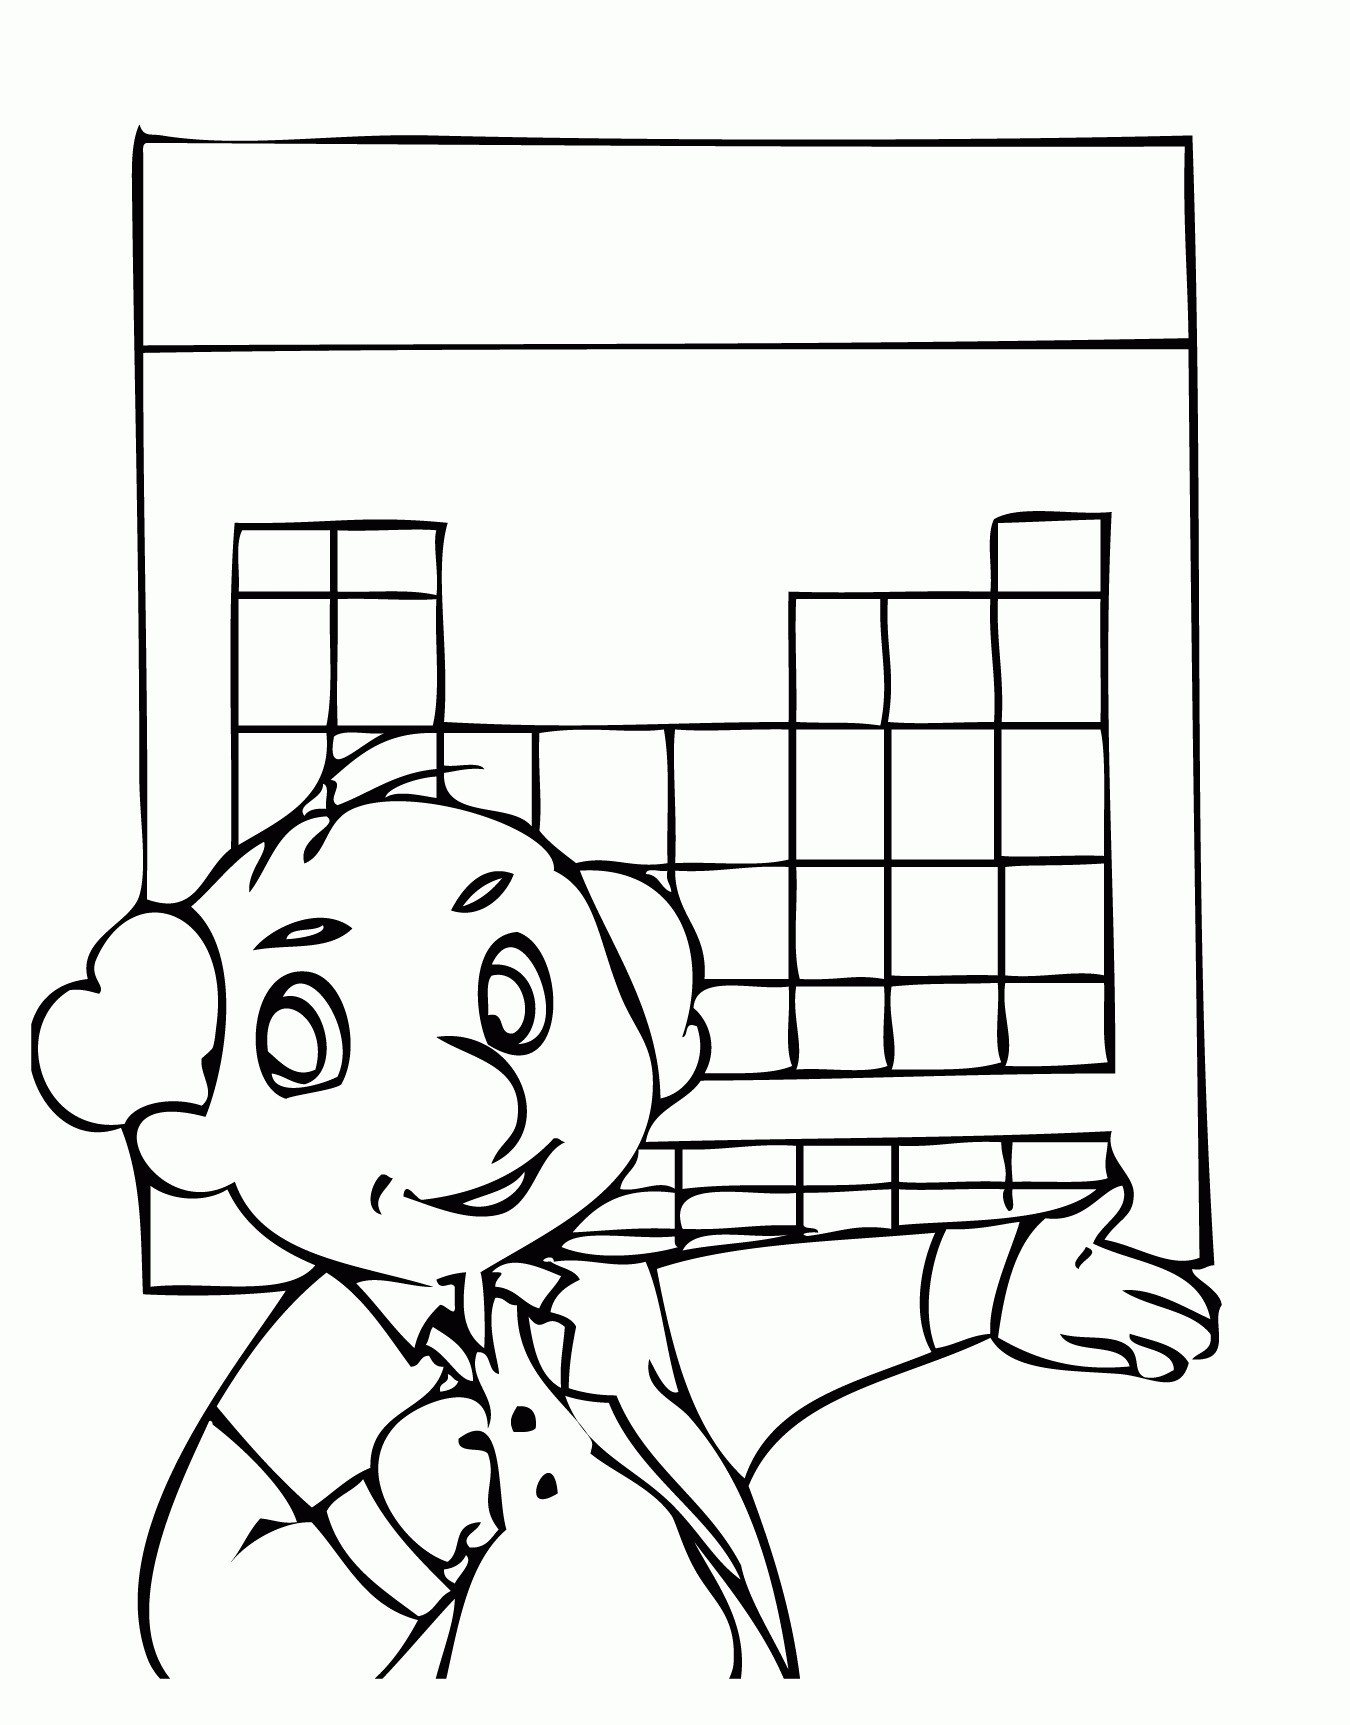 Periodic Table Coloring Page - Handipoints